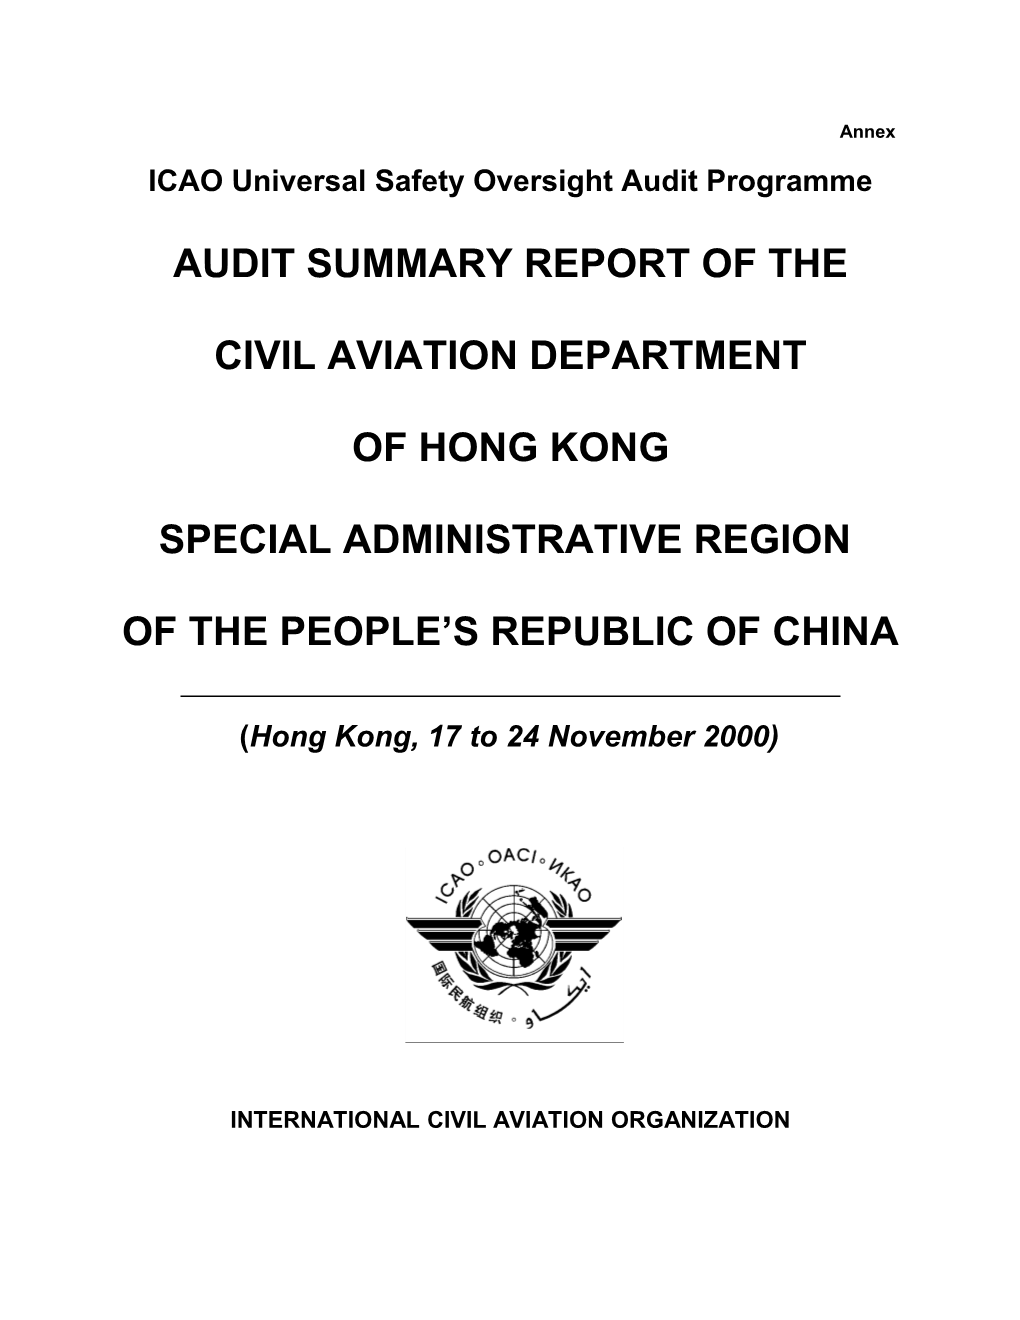 ICAO Universal Safety Oversight Audit Programme